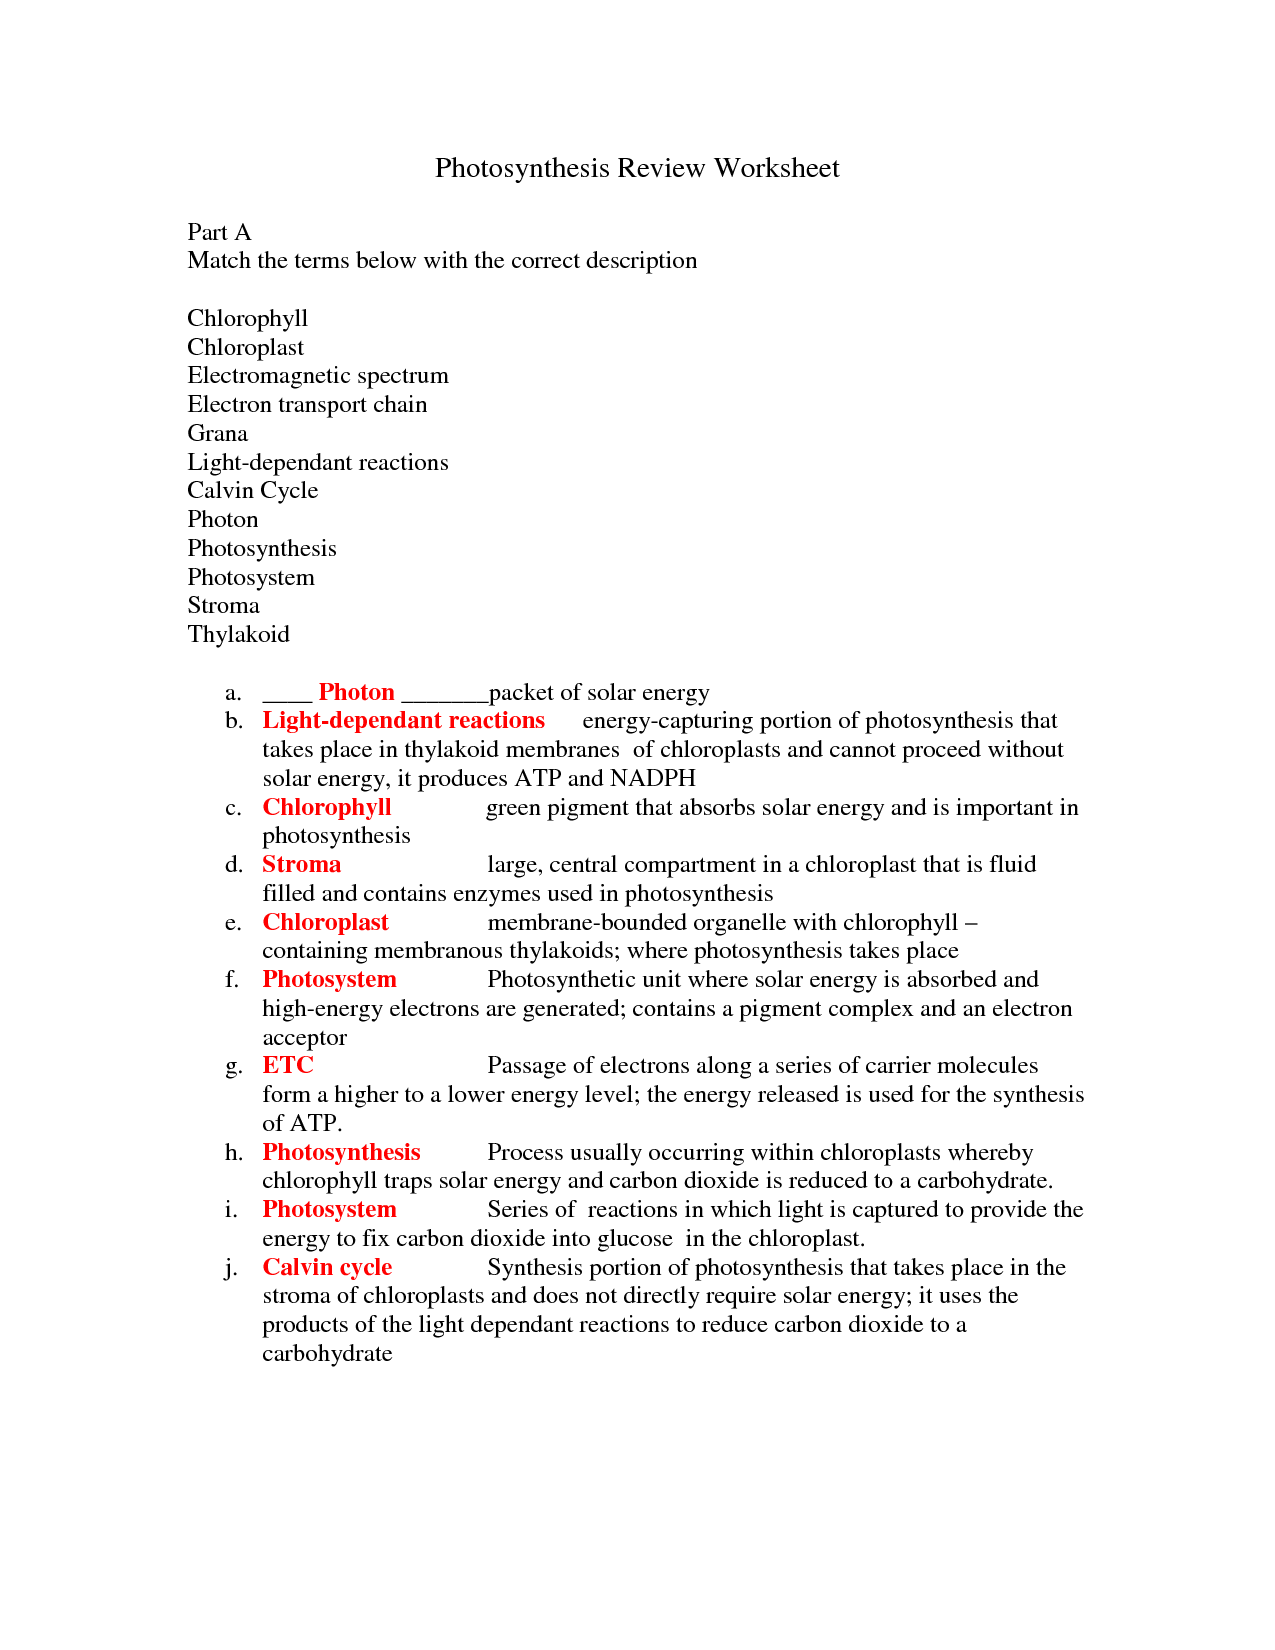 14-best-images-of-photosynthesis-worksheet-answer-key-photosynthesis-review-worksheet-answer